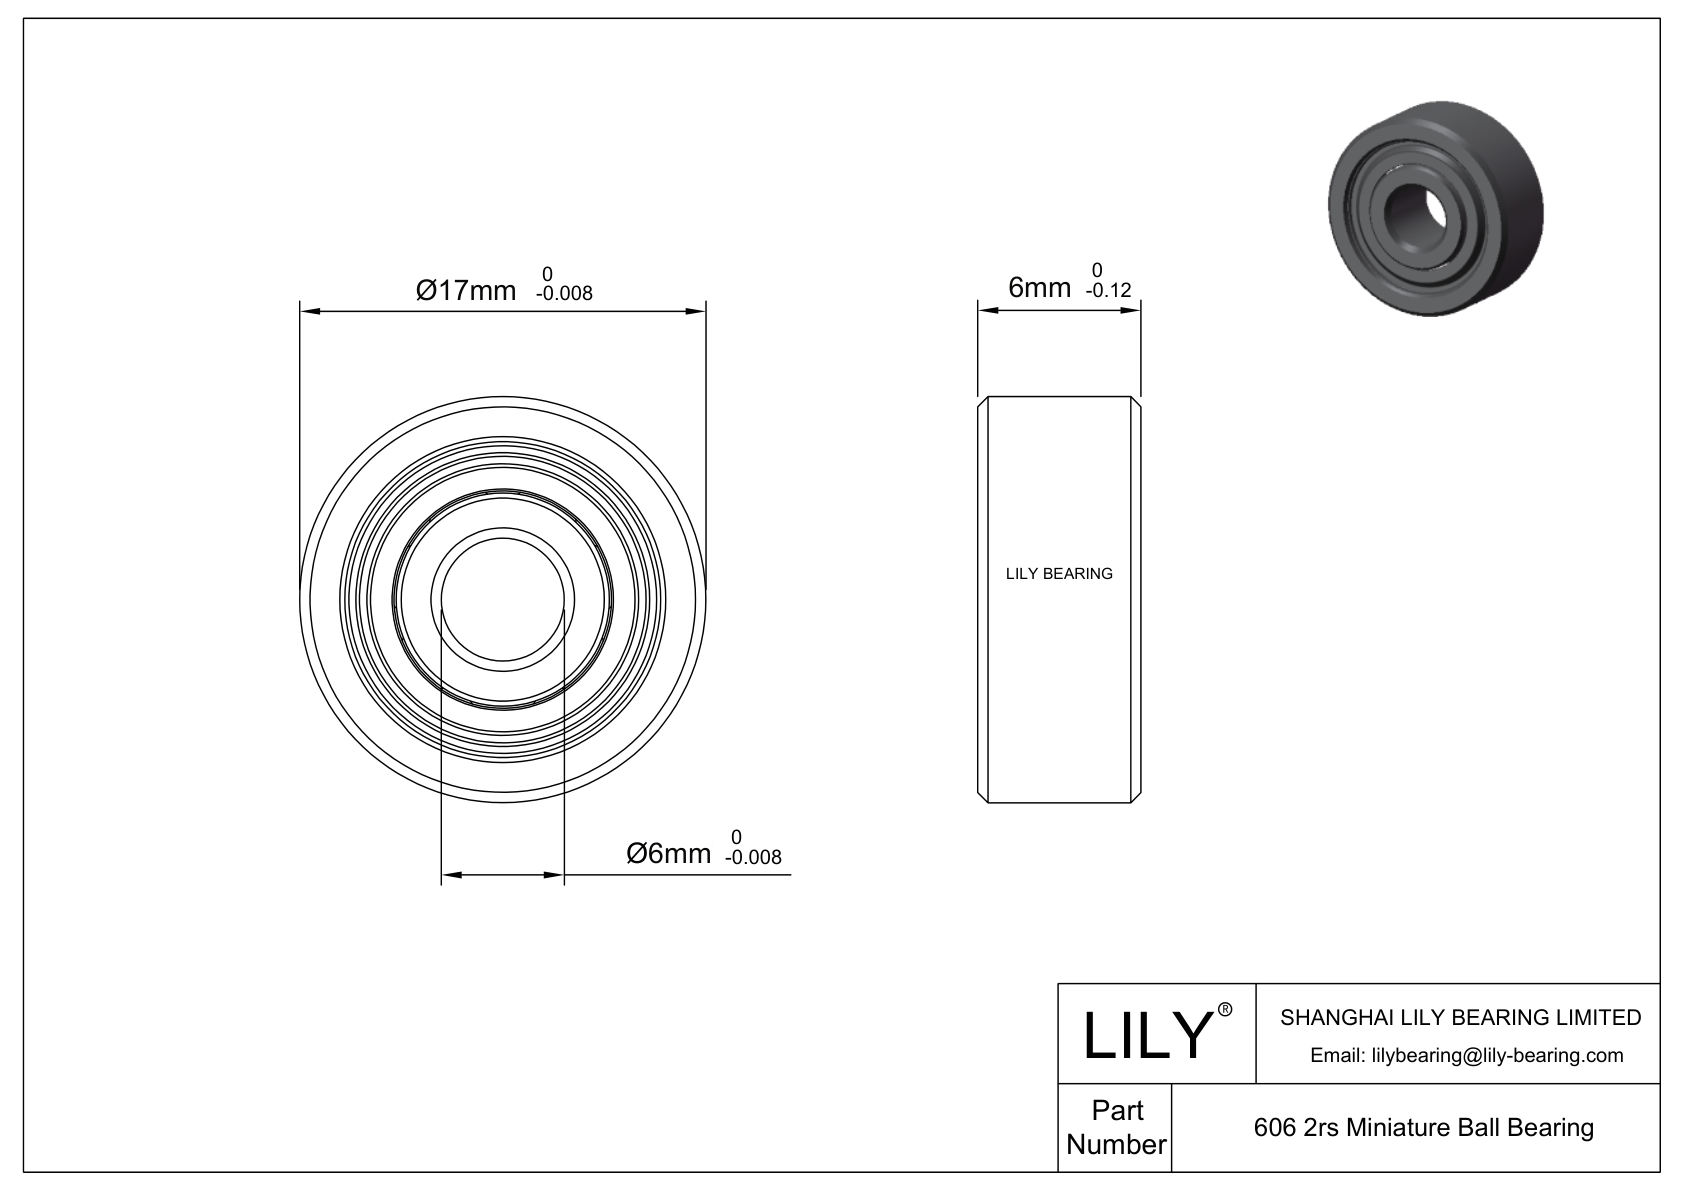 LILY-BS60622-6 POM Coated Bearing cad drawing